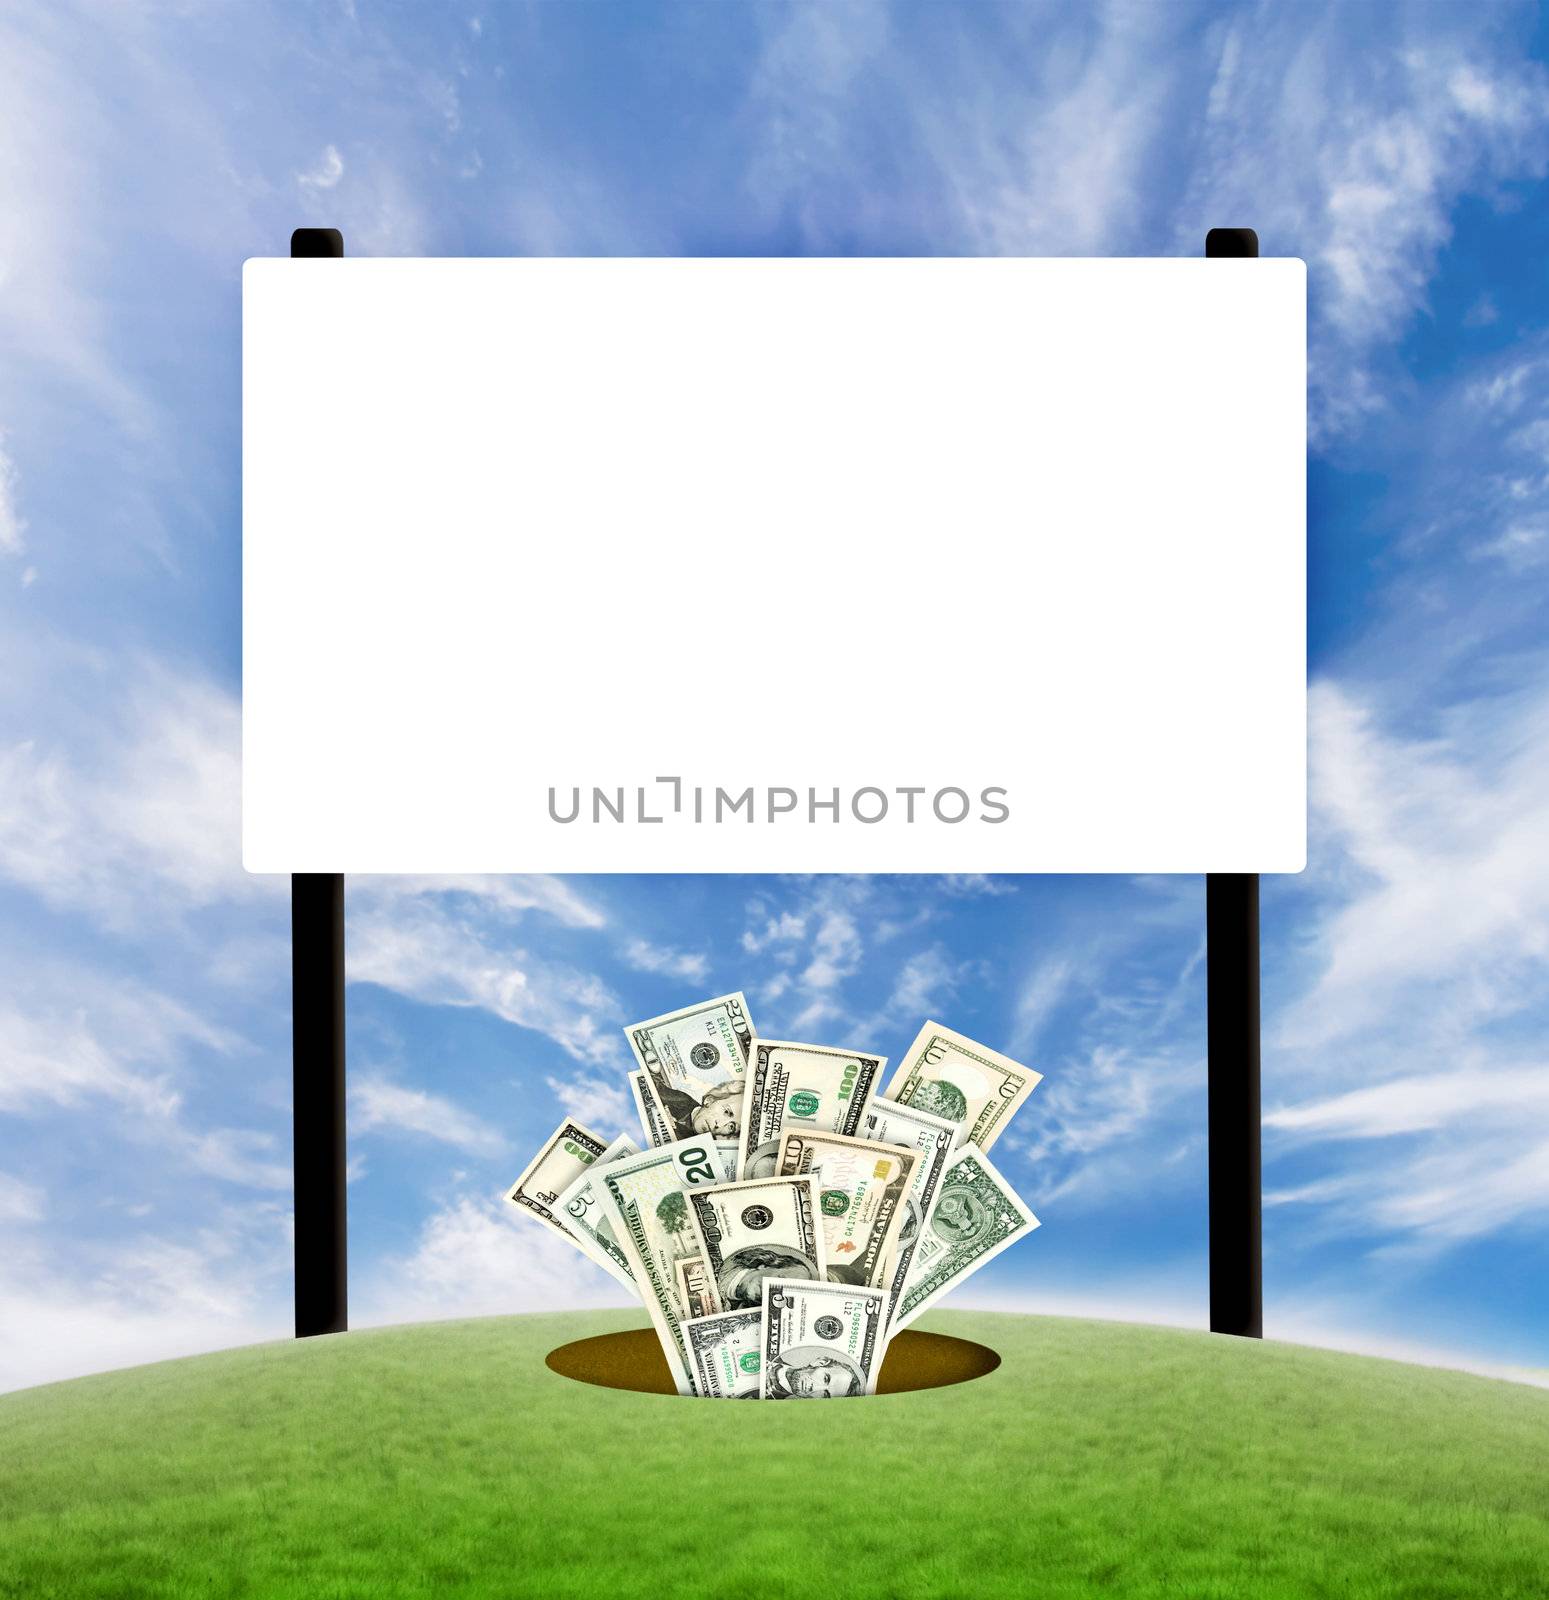 Concept for advertisement purposes with dollars coming from the ground.